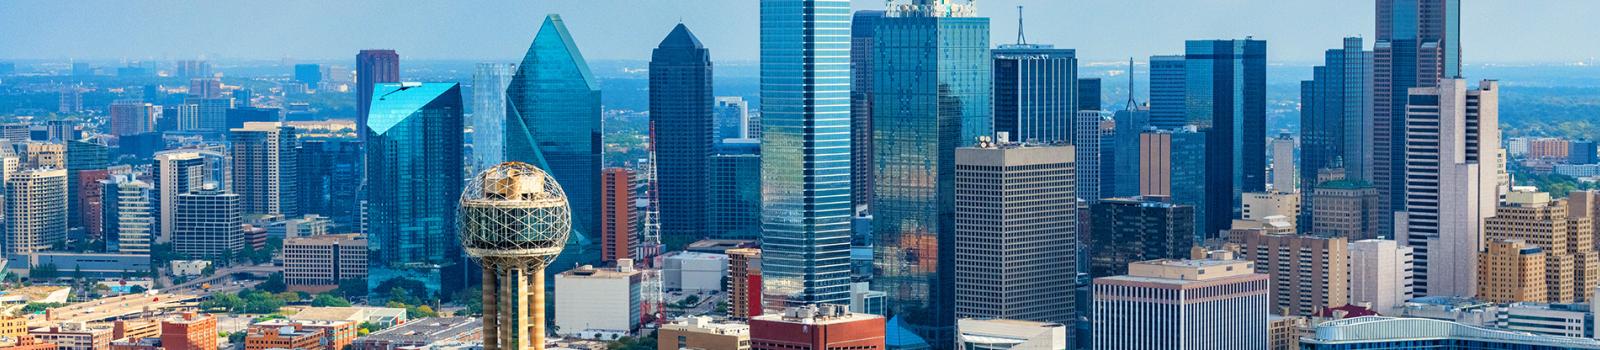 Downtown Buildings | Dallas Business Banking